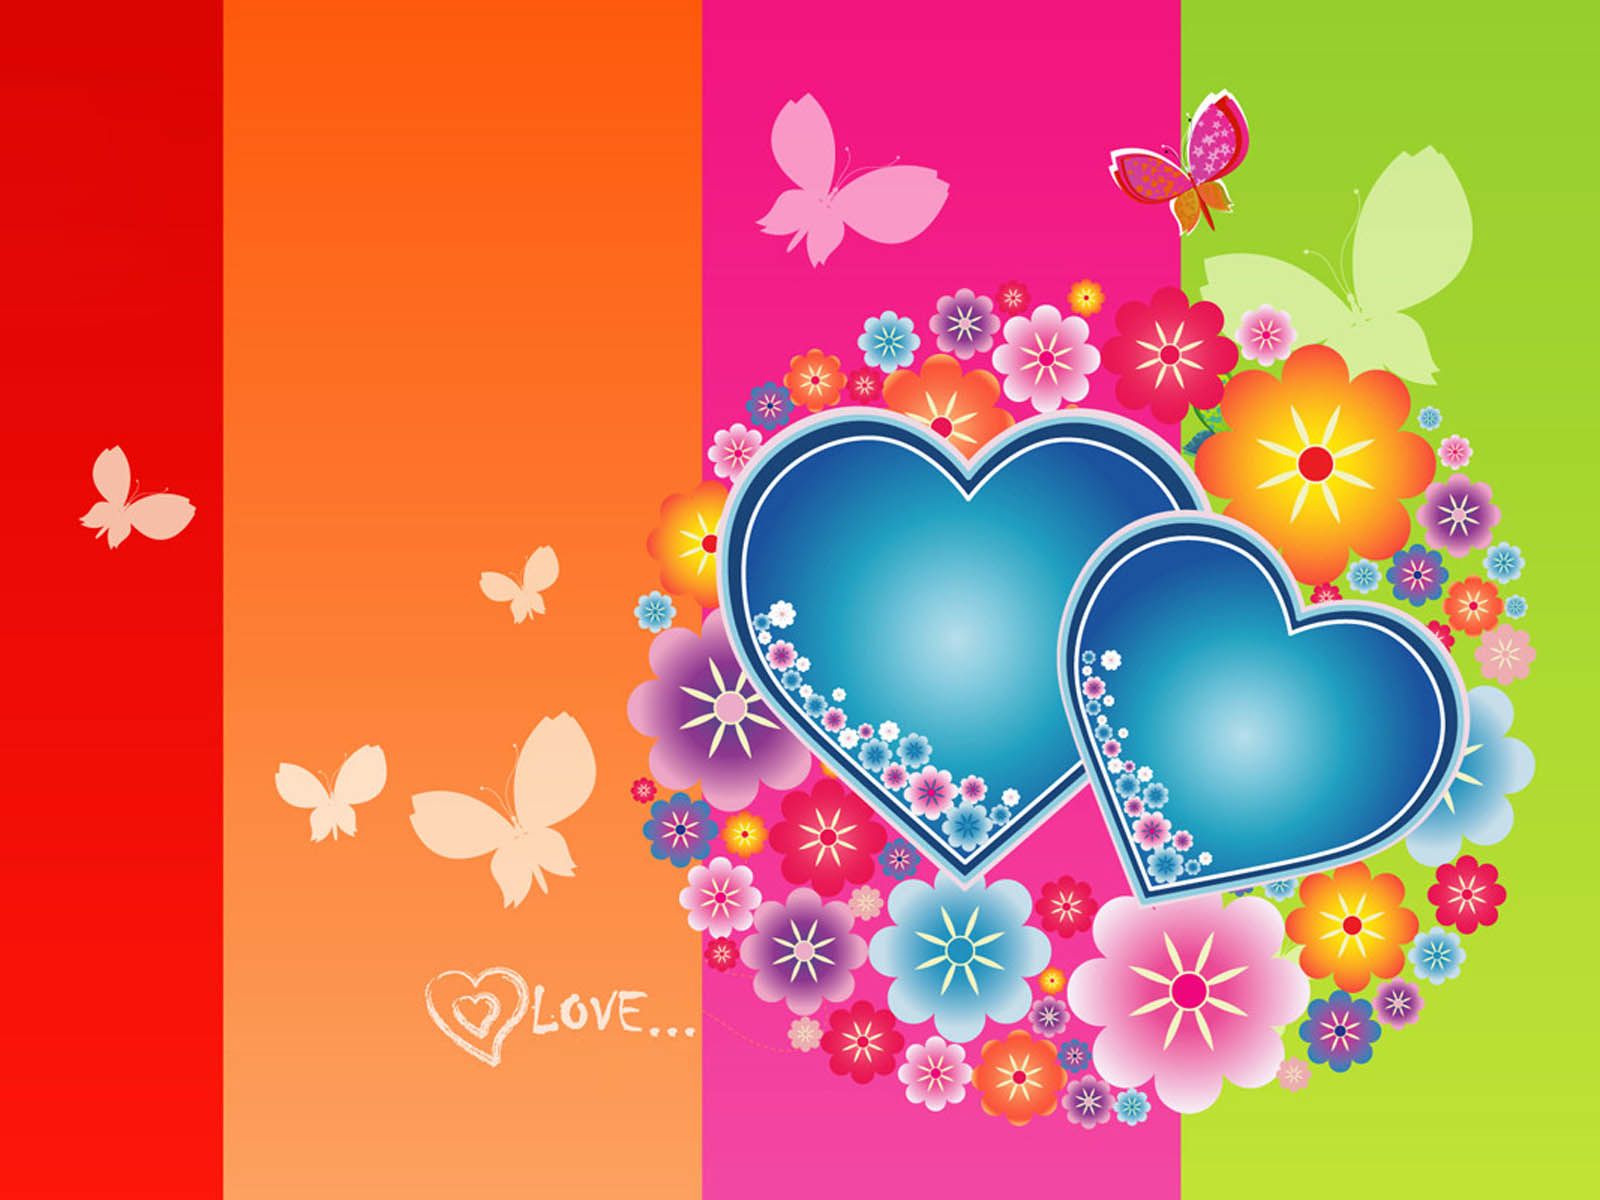 Love Hearts Wallpapers HD Pictures Live HD Wallpaper HQ Pictures